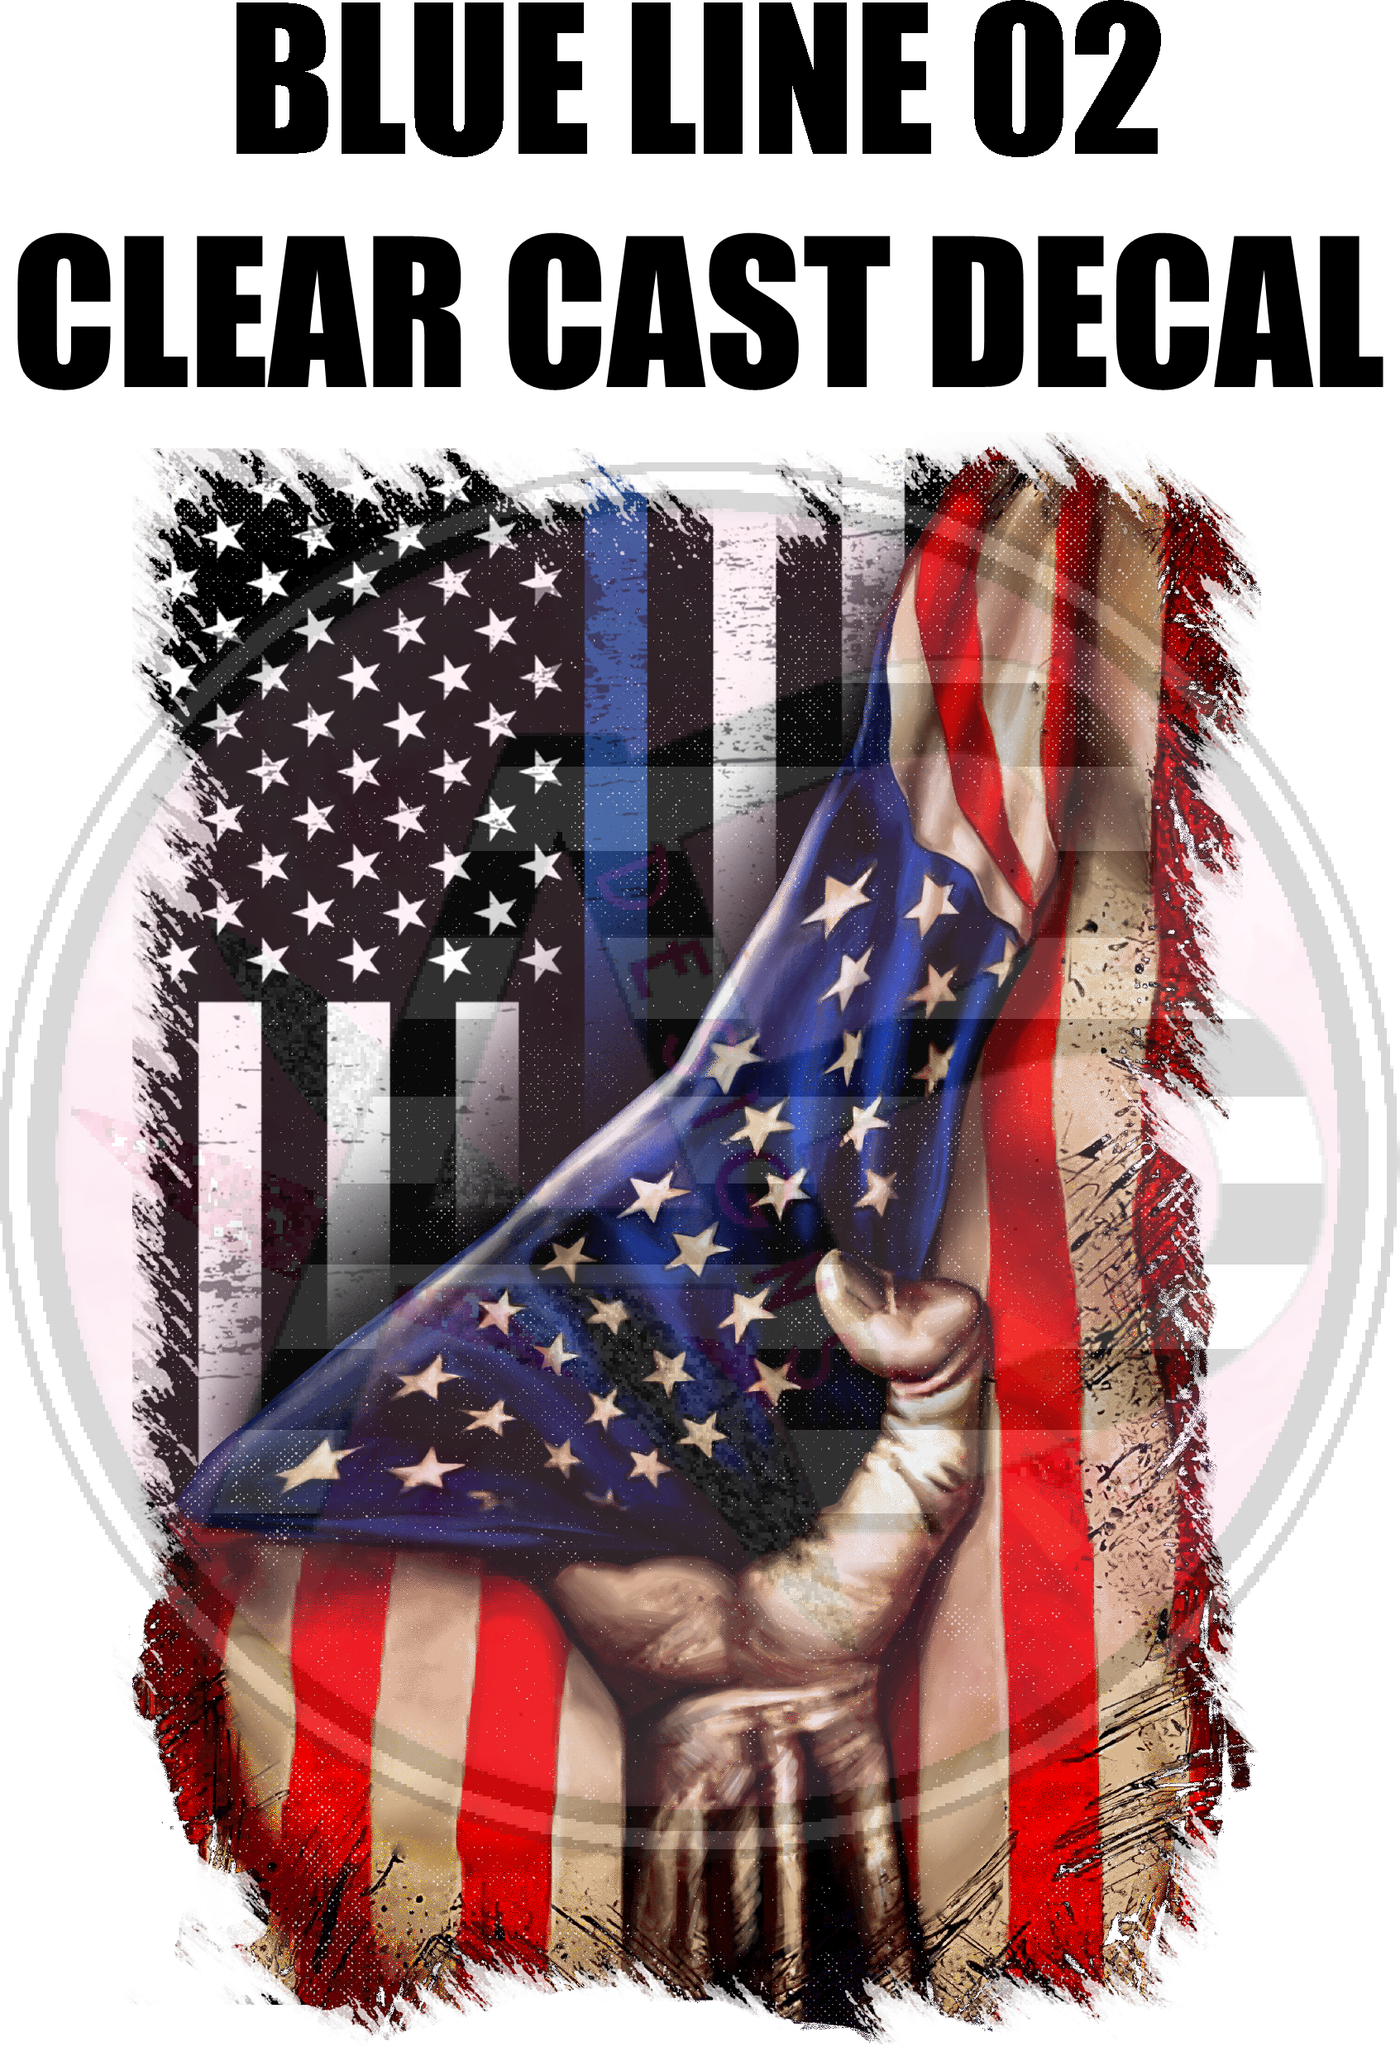 Blue Line 02 - Clear Cast Decal